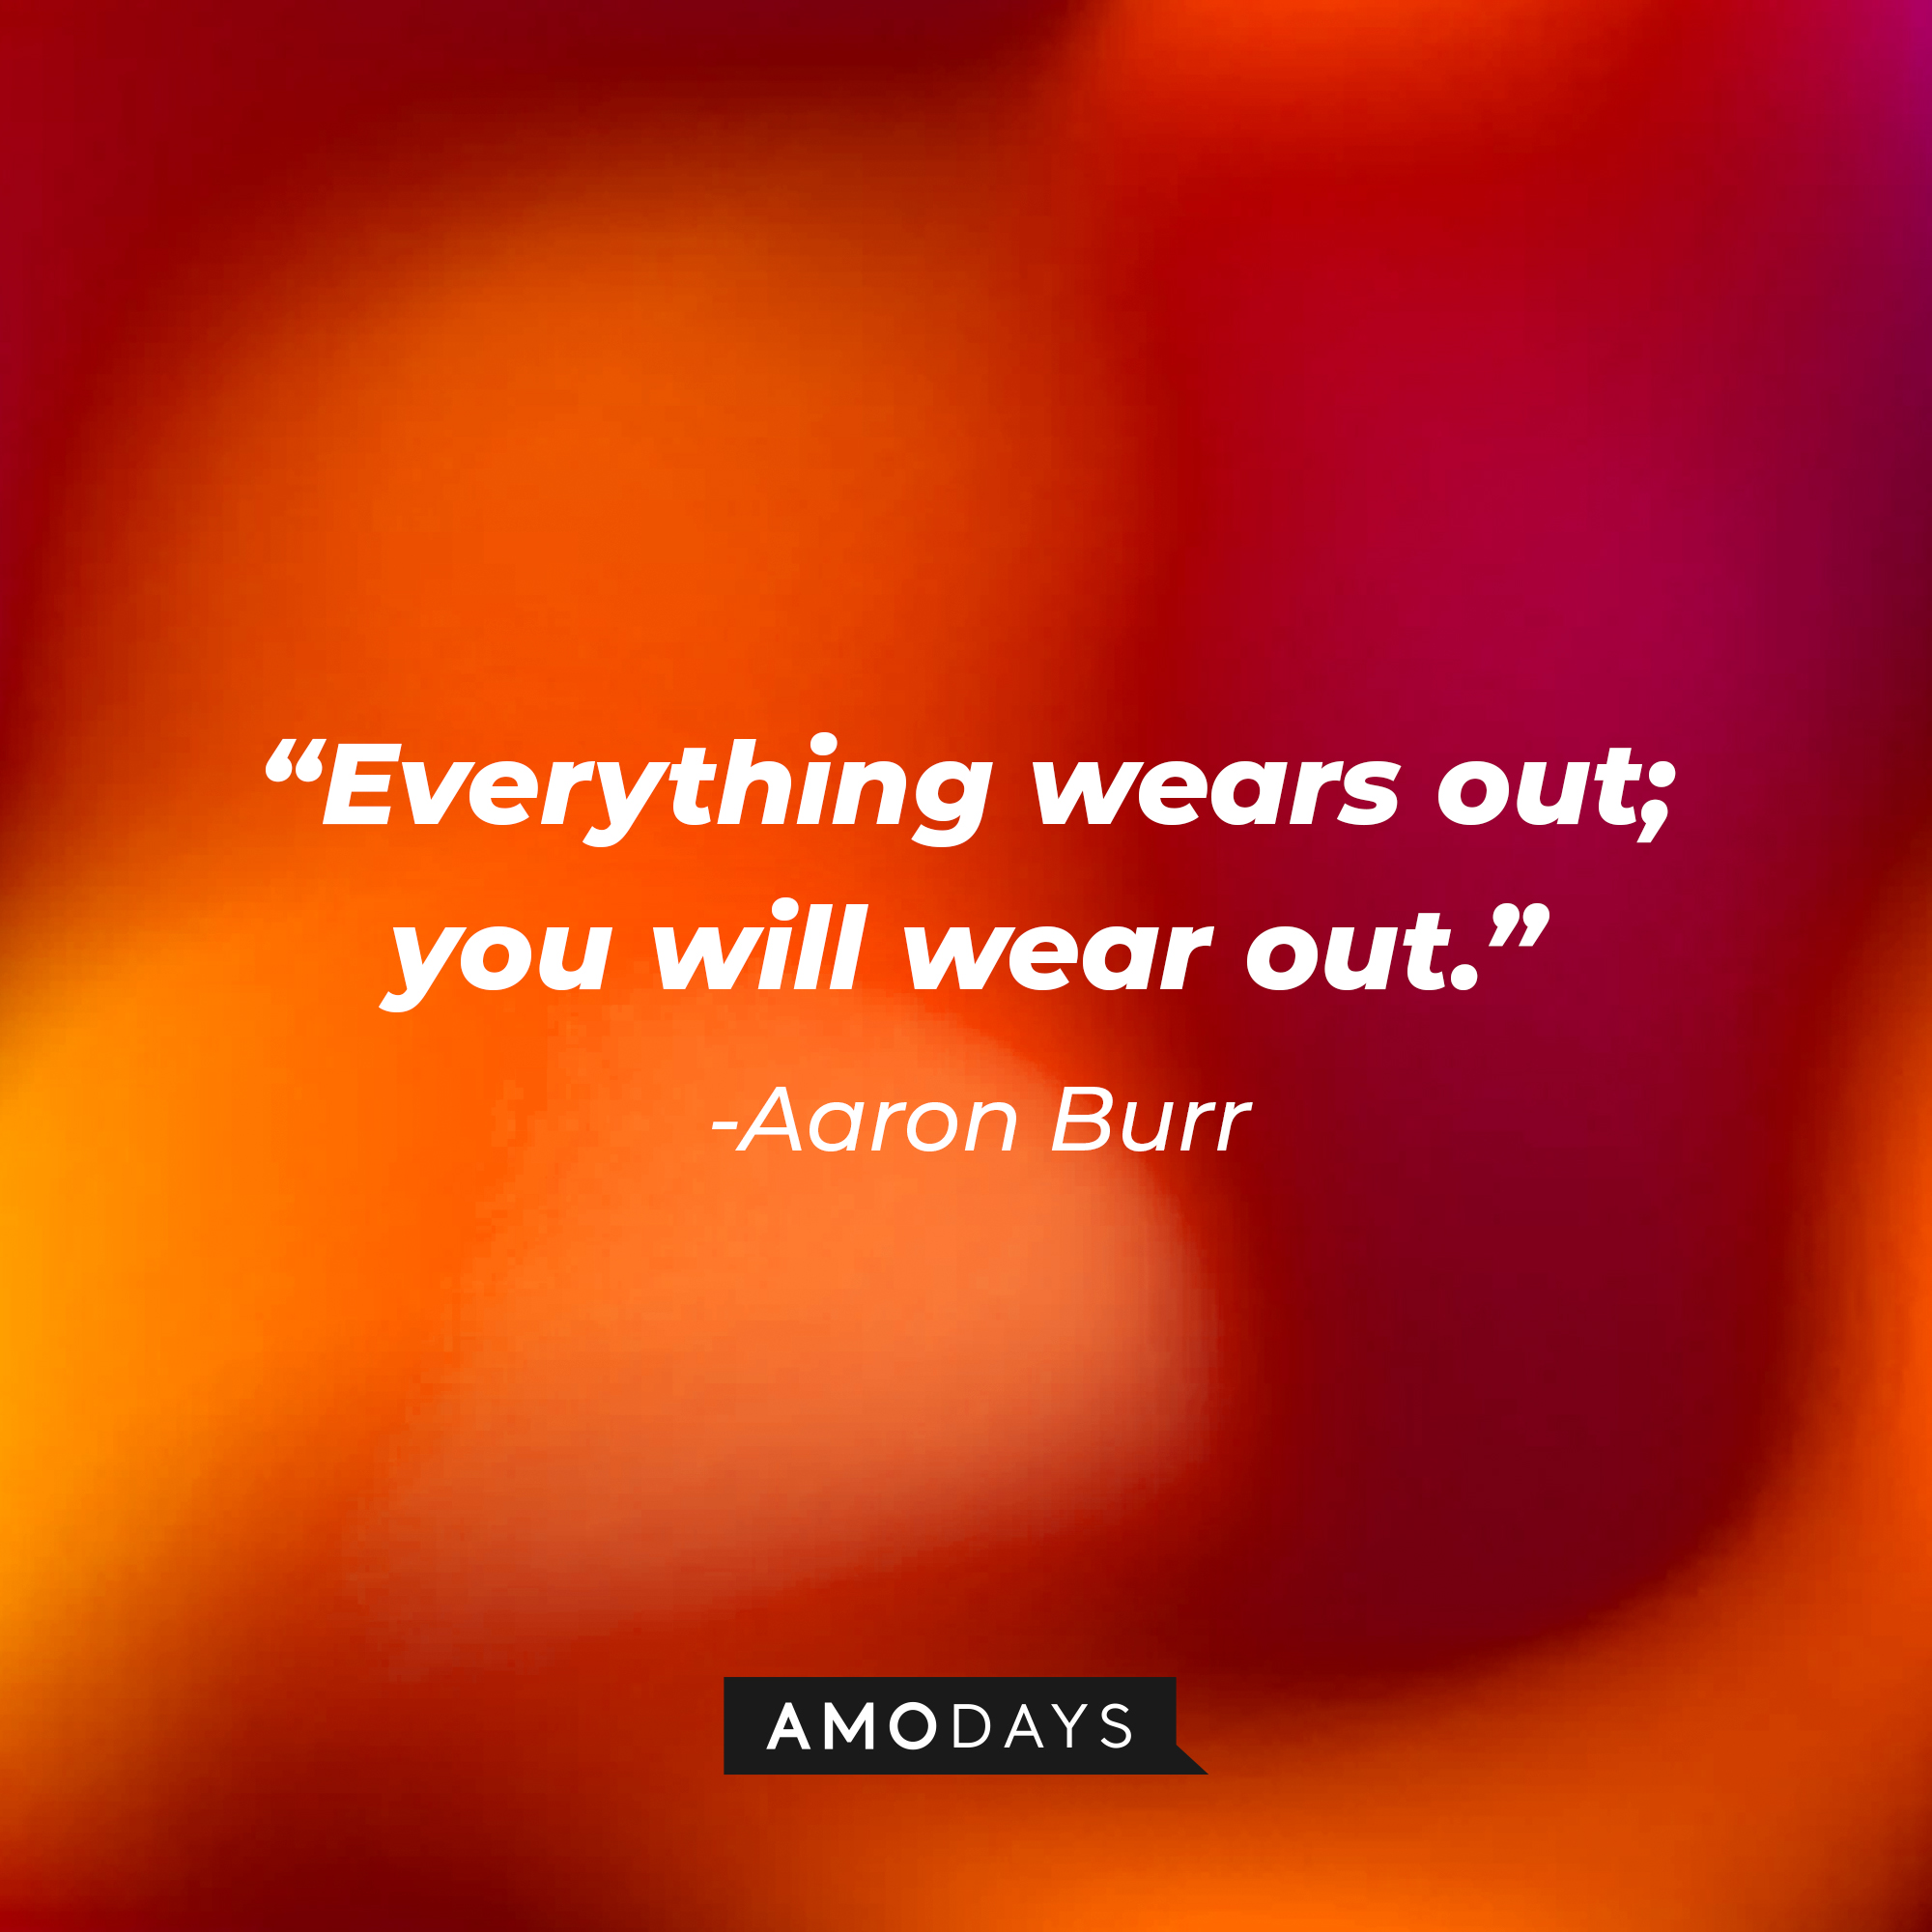 Aaron Burr’s quote: “Everything wears out; you will wear out.” | Source: AmoDays